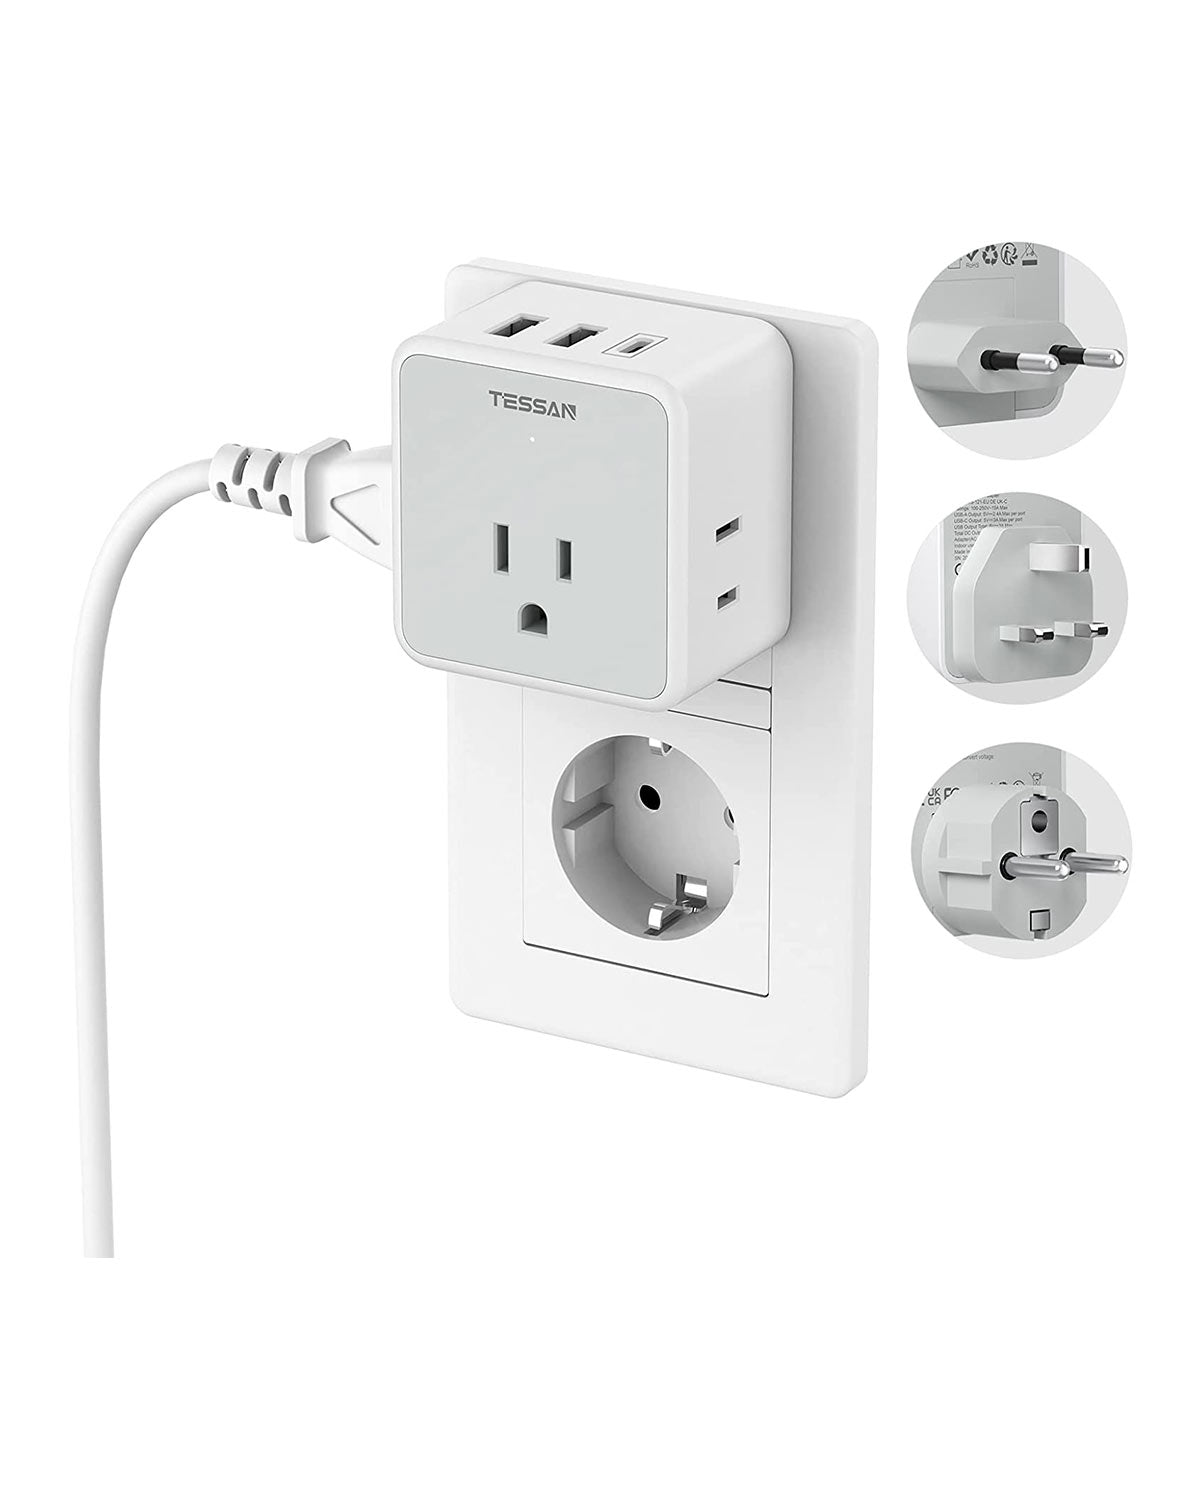 TESSAN All European UK Travel Plug Adapter Kit with 3 Outlet 3 USB Charger (1 USB C)